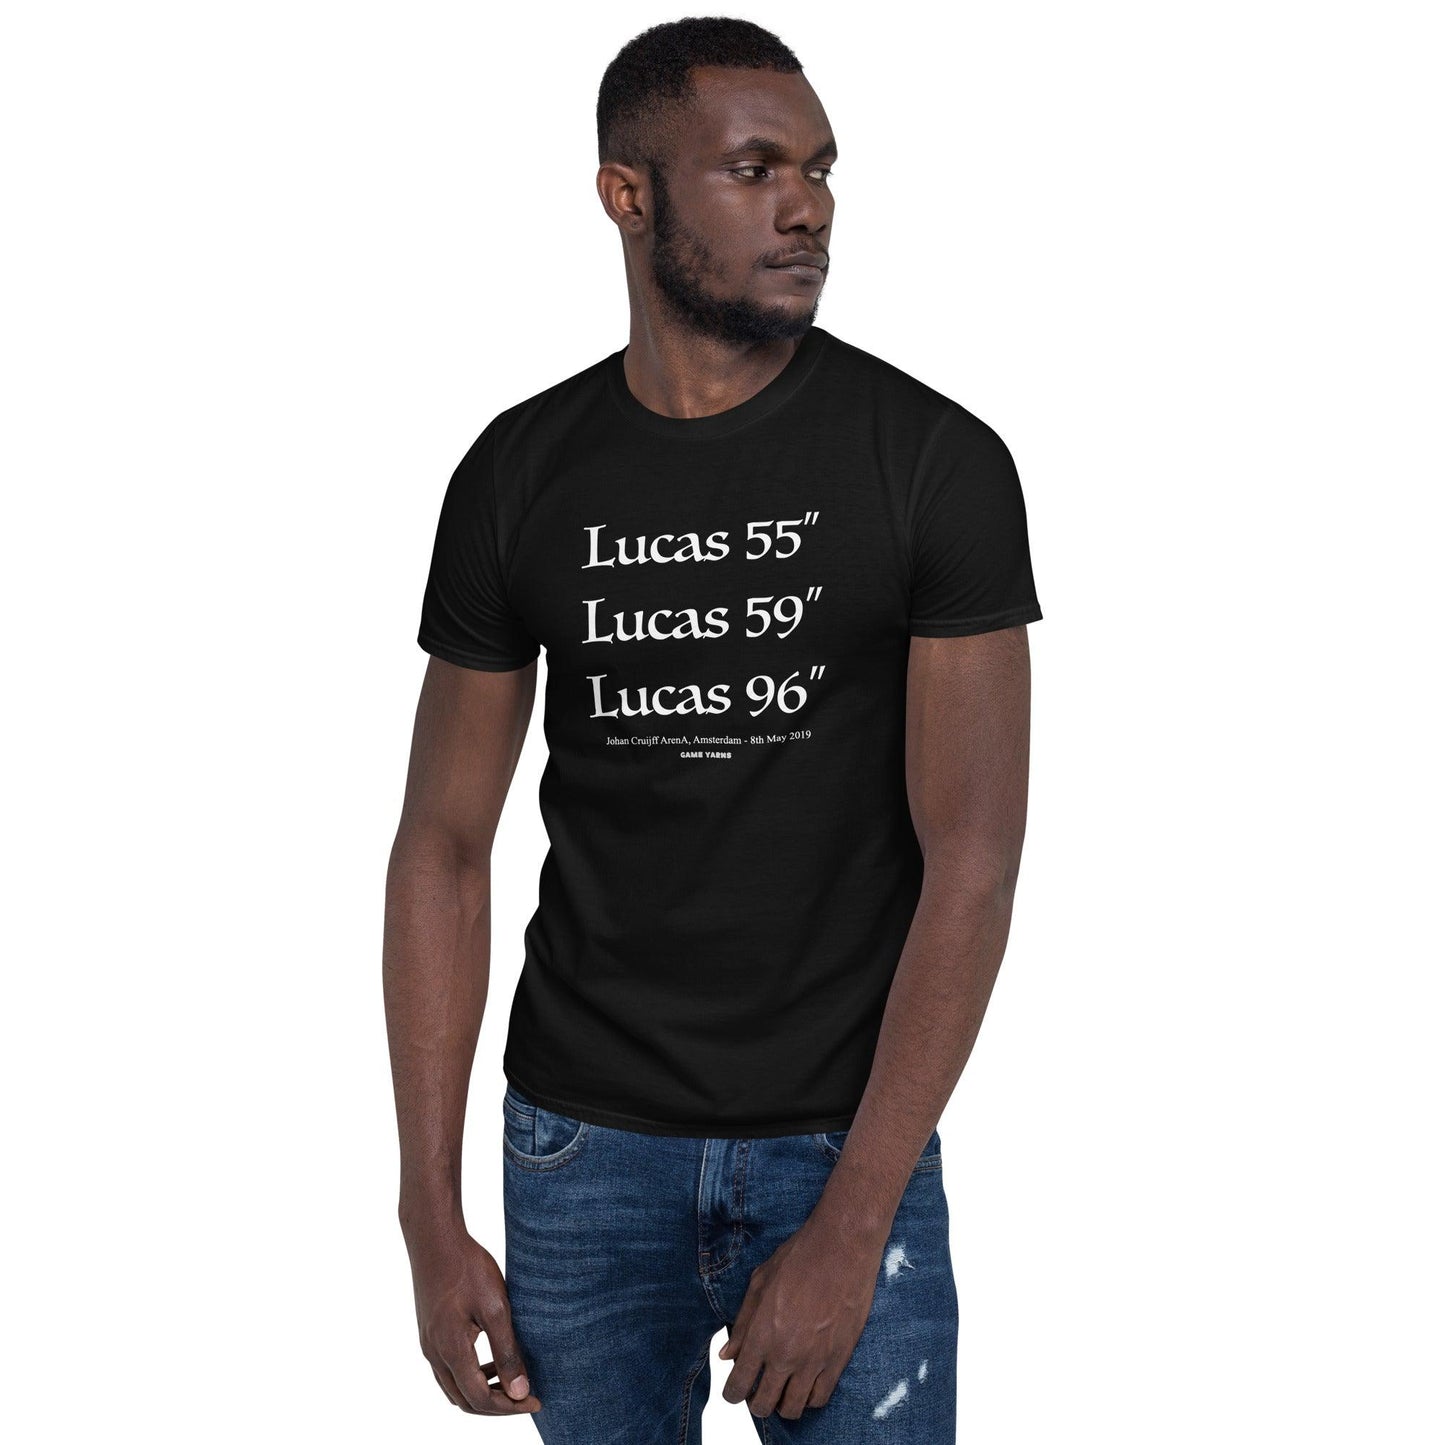 Lucas Moura Miracle of Amsterdam Game Yarns T-Shirt - Game Yarns